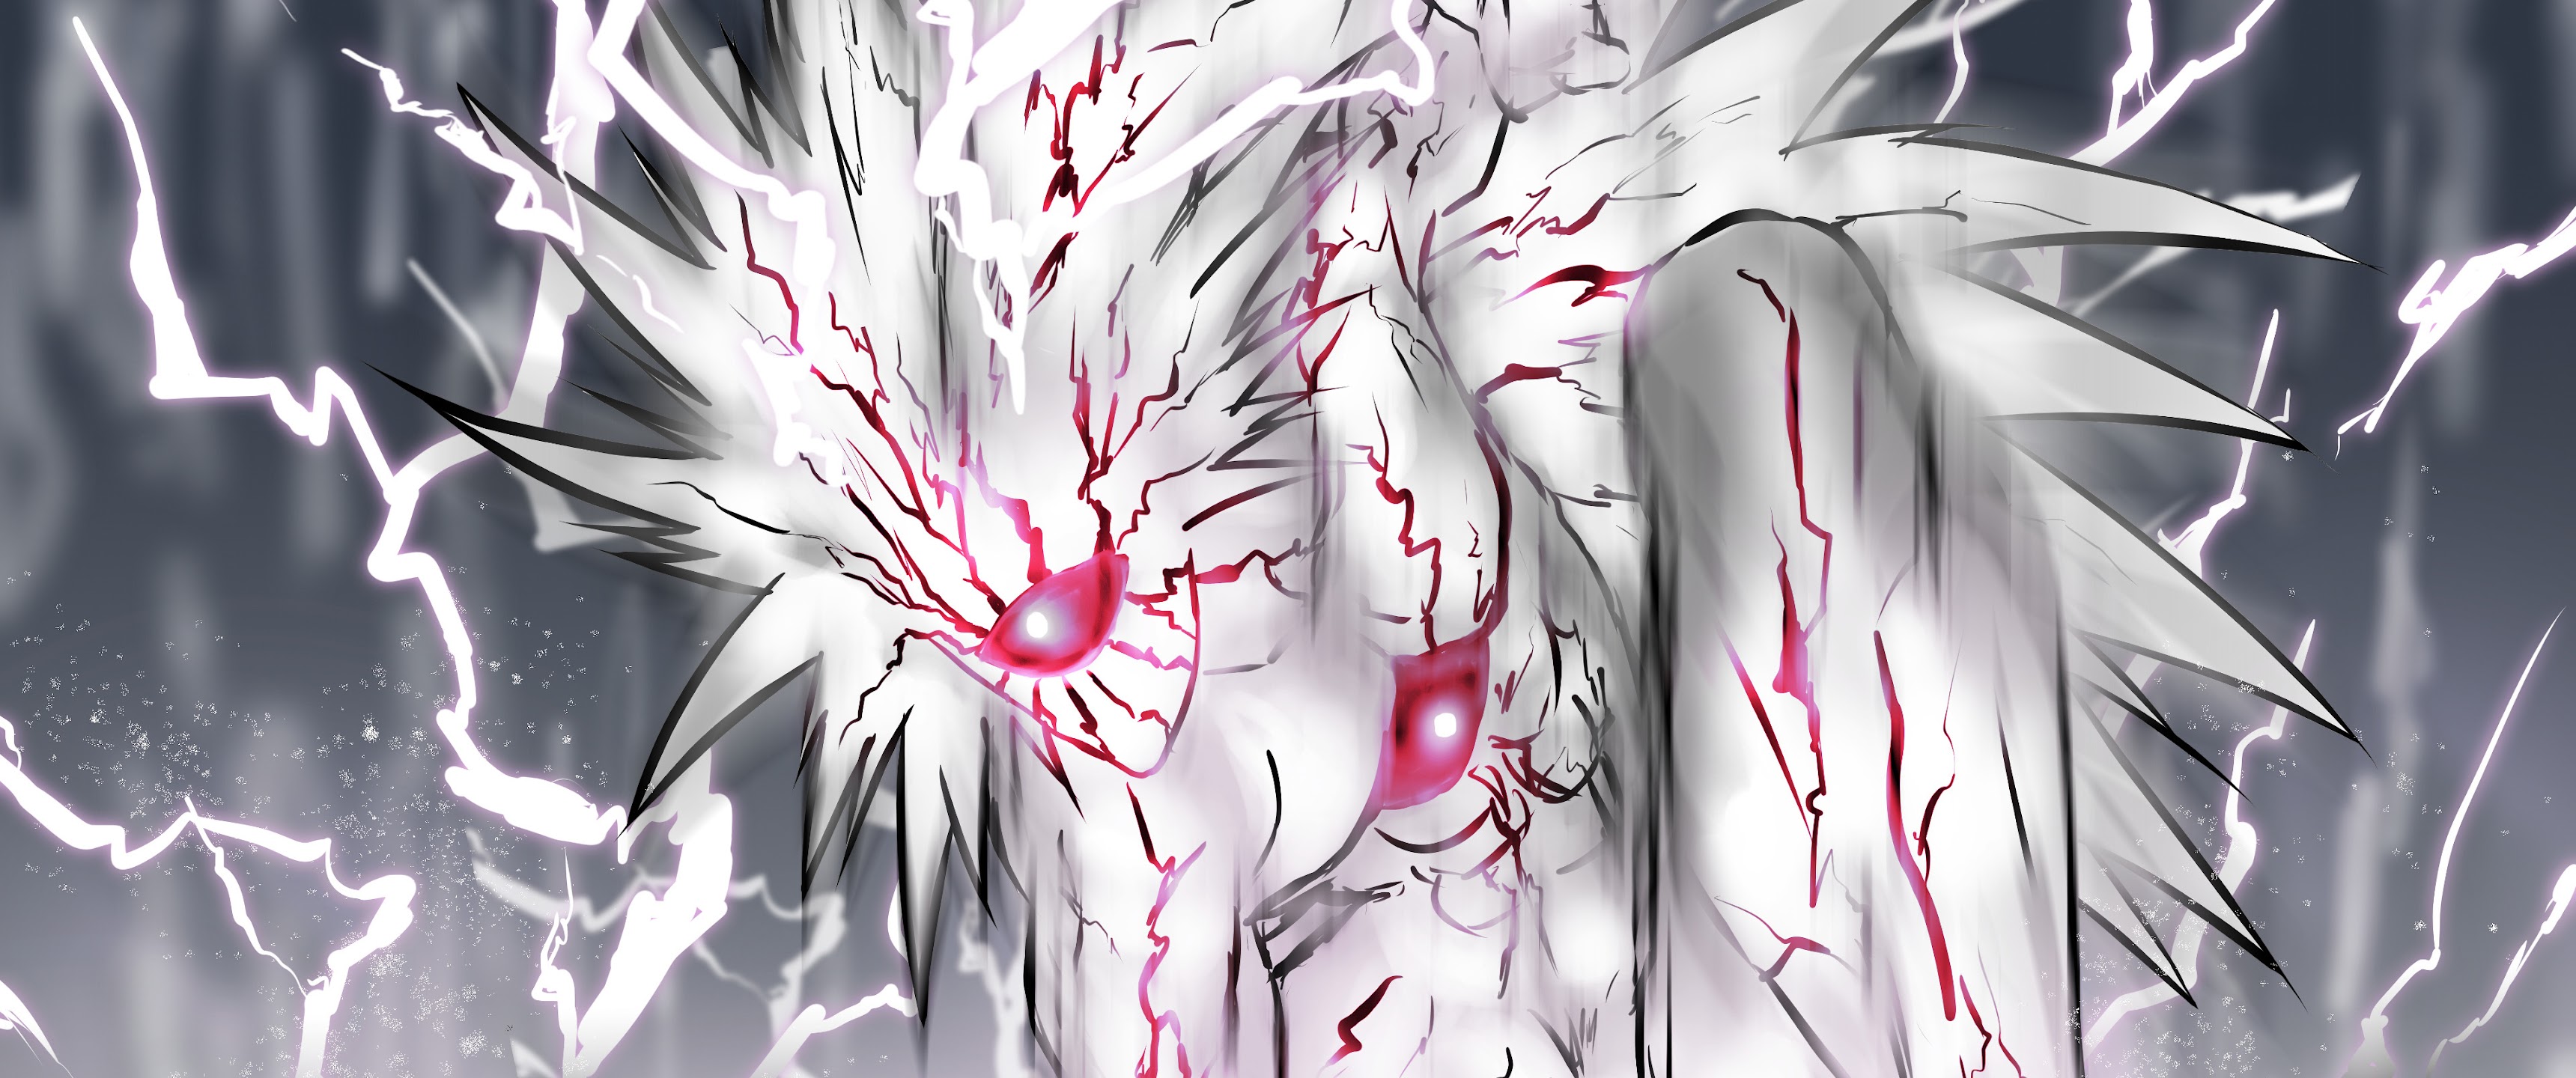 Lord Boros Wallpapers